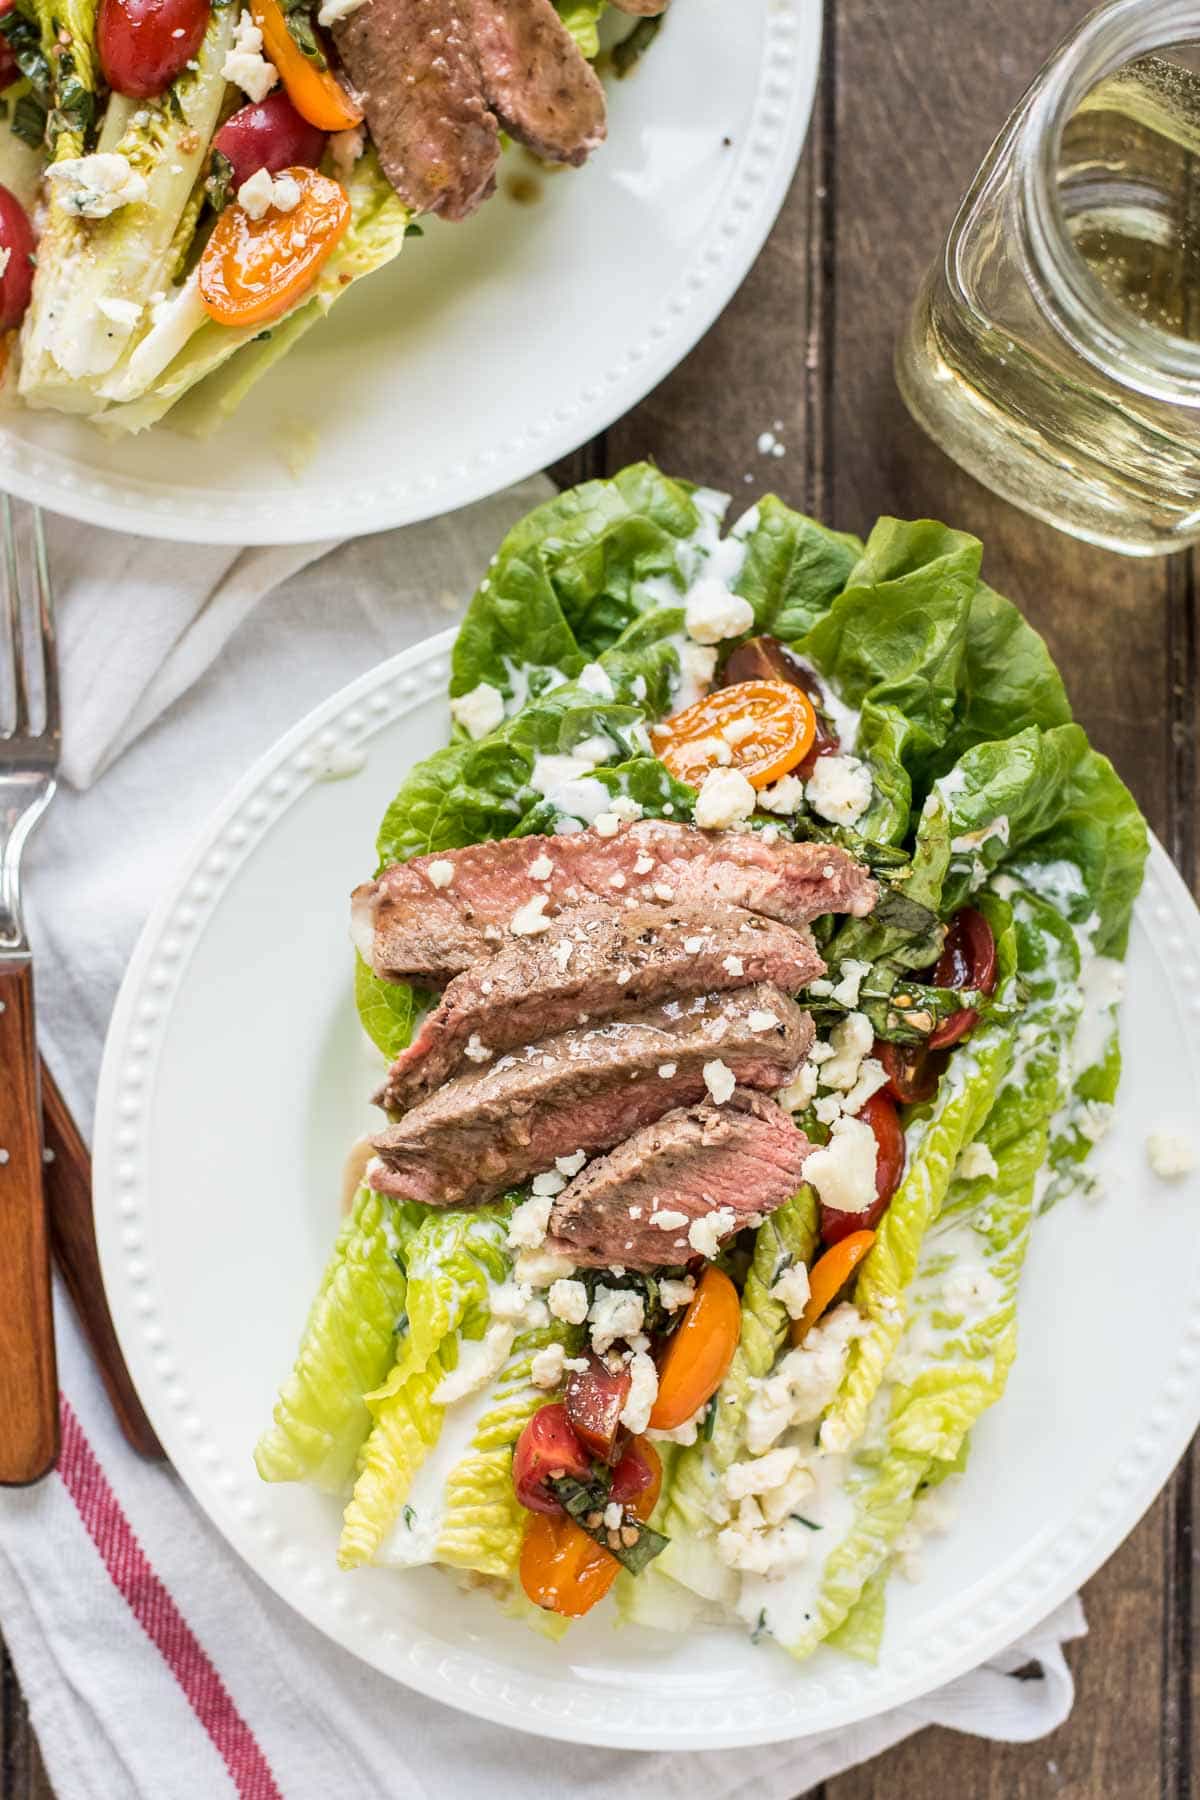 This Steak and Blue Cheese Salad with bruschetta cherry tomatoes is the perfect summer meal.